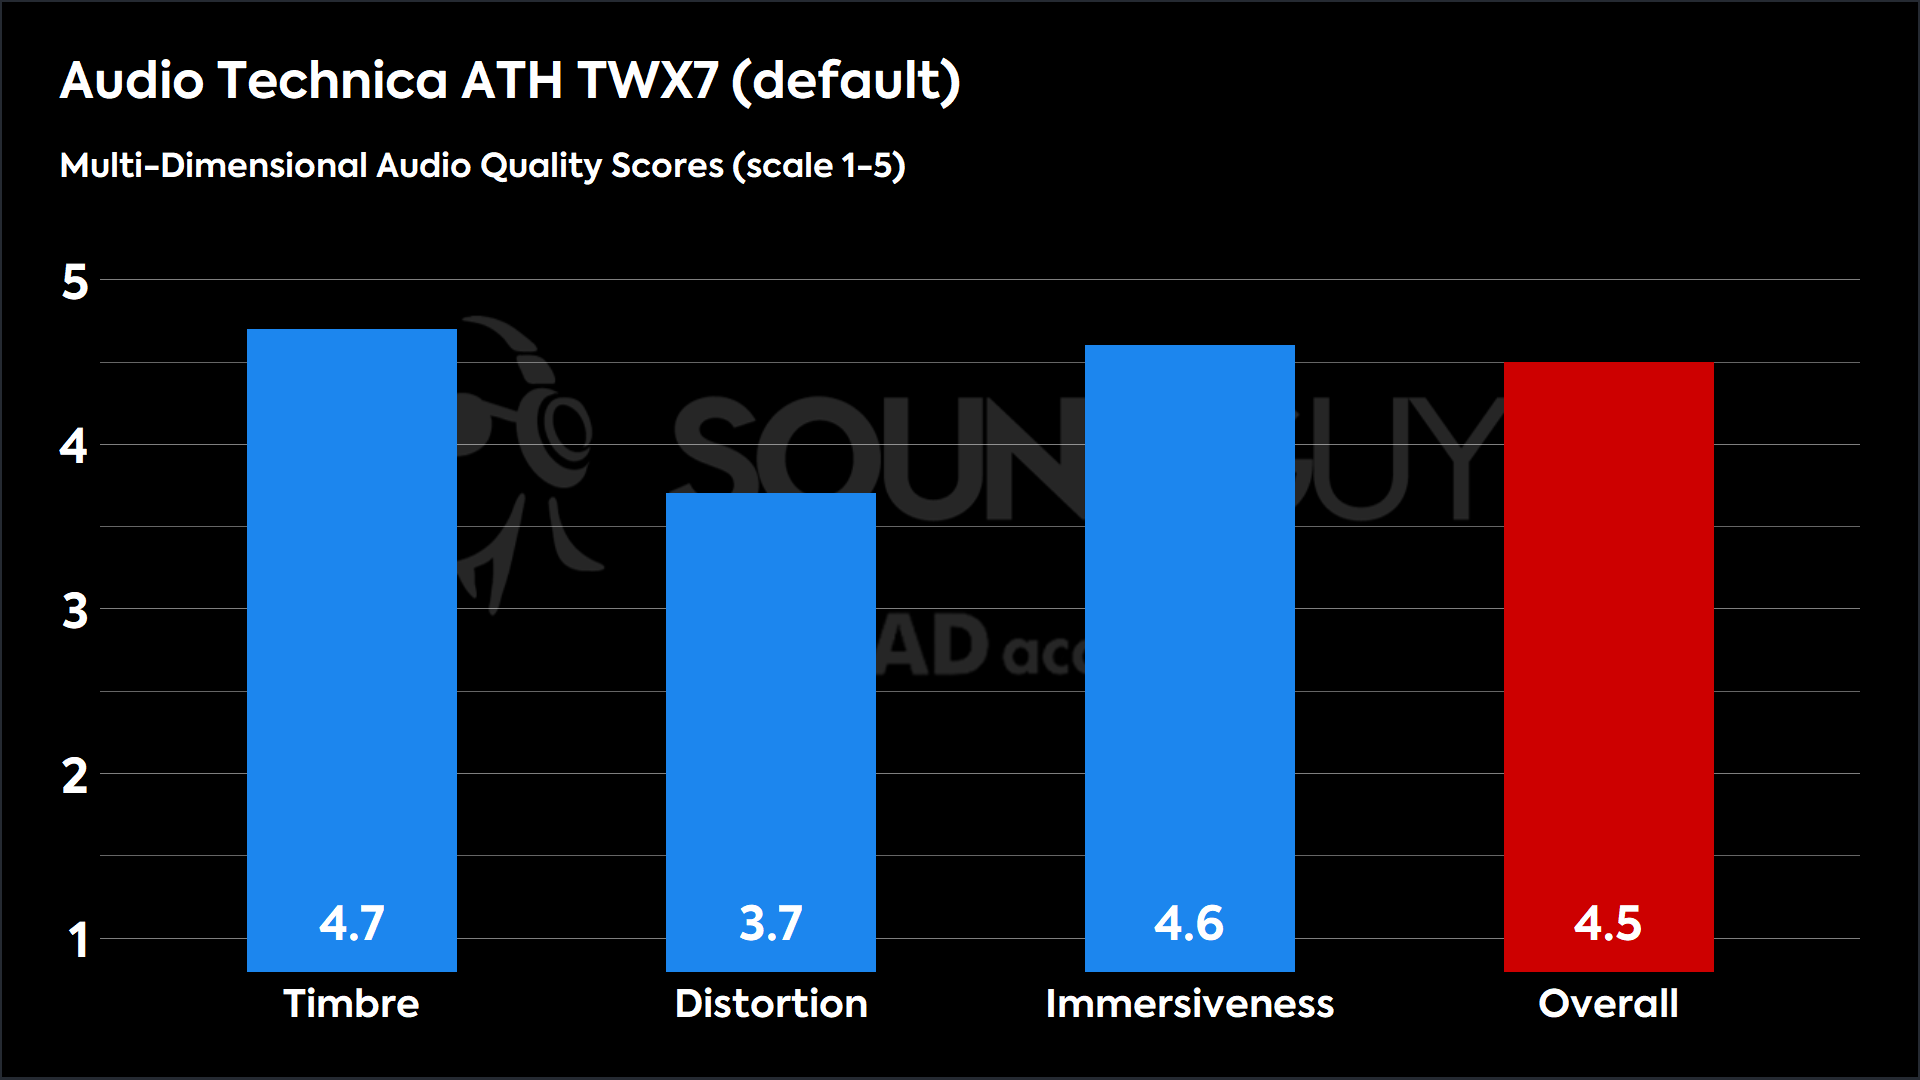 This chart shows the MDAQS results for the Audio Technica ATH TWX7 in default mode. The Timbre score is 4.7, The Distortion score is 3.7, the Immersiveness score is 4.6, and the Overall Score is 4.5).